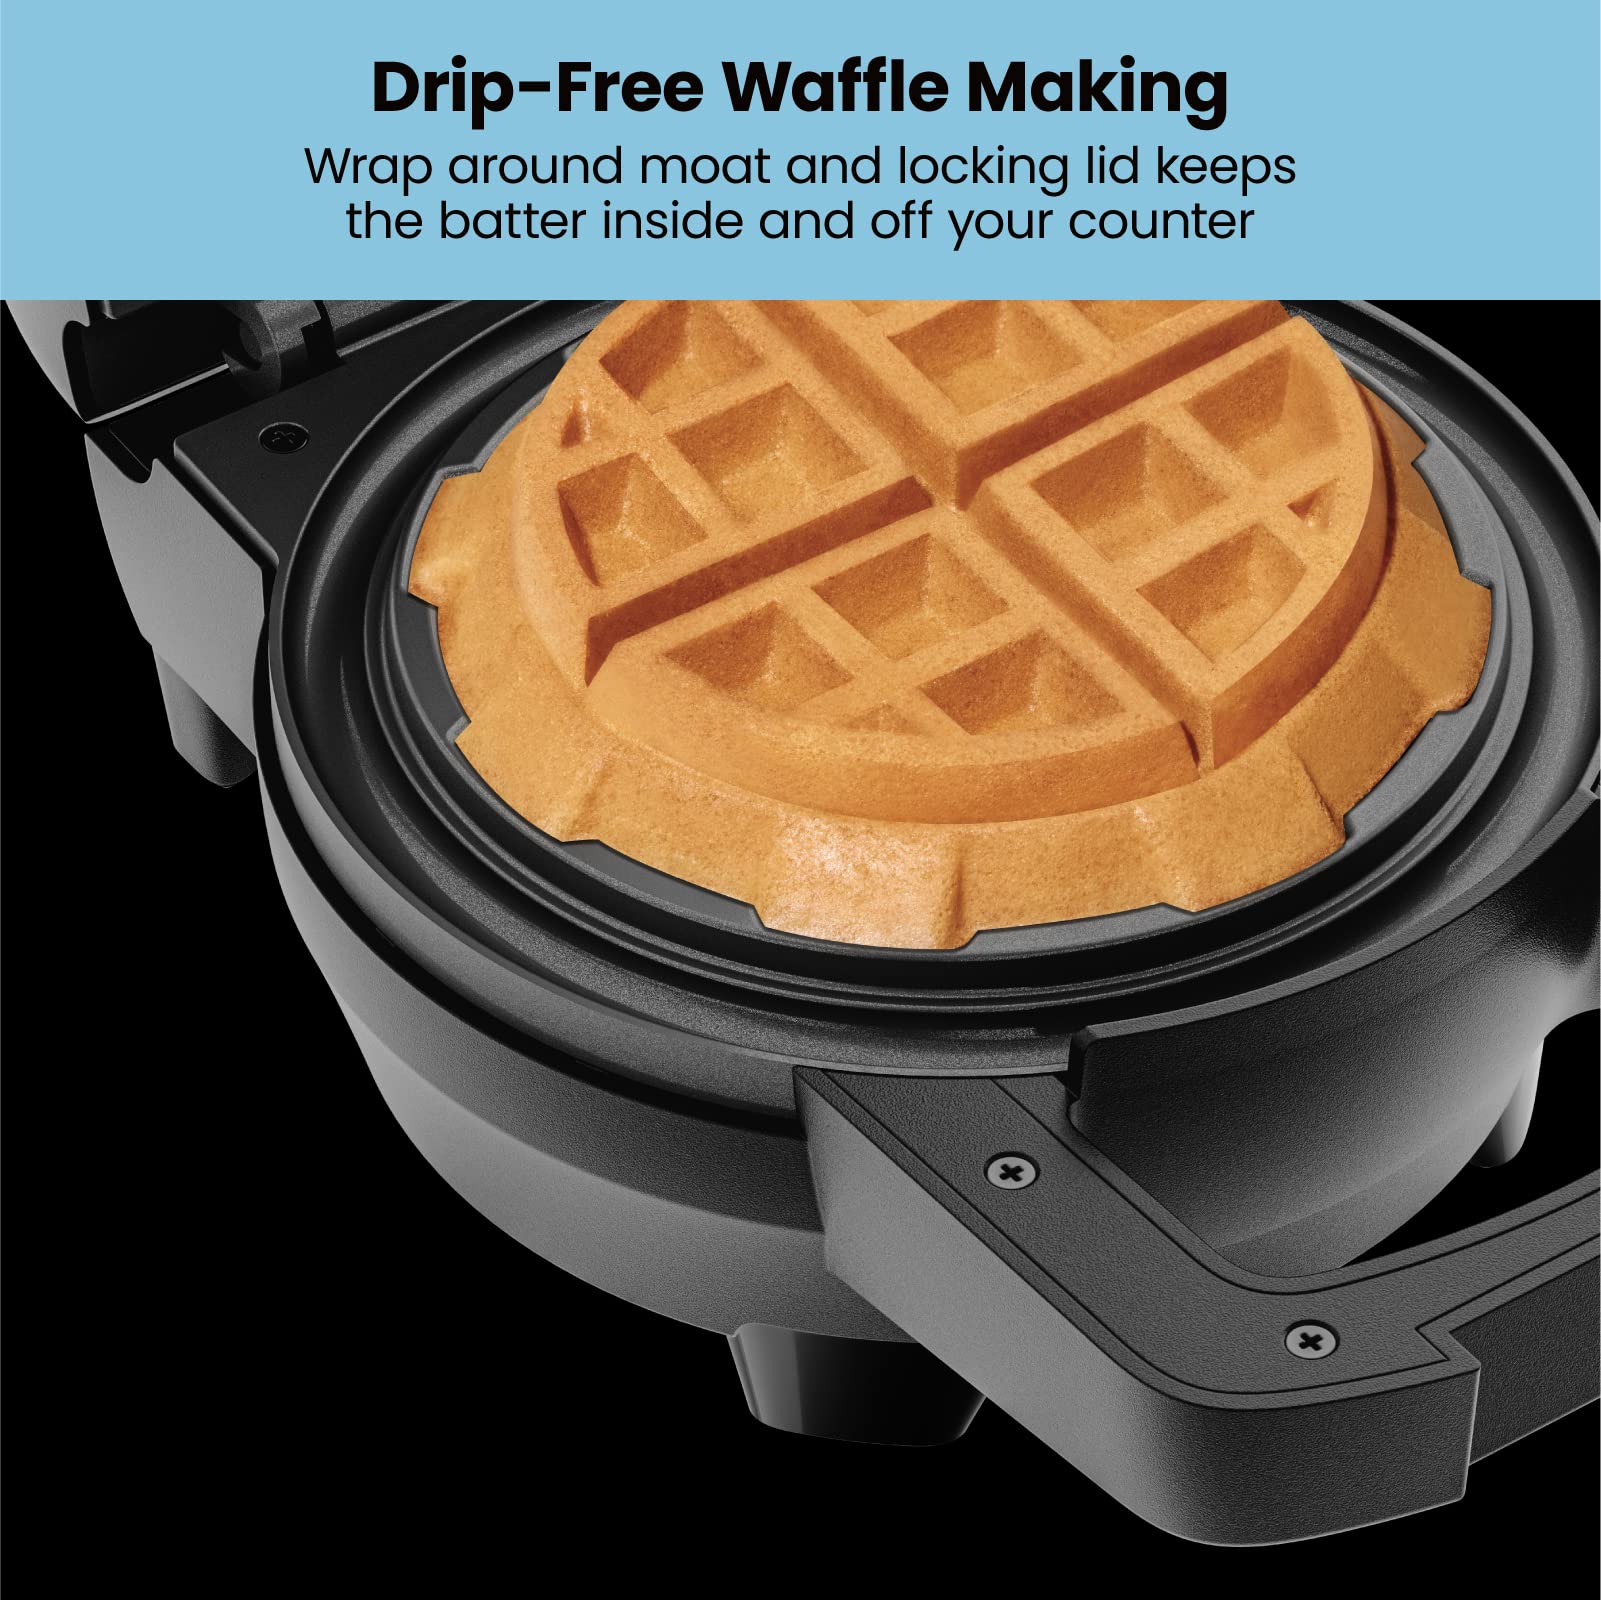 Chefman Big Stuff, Belgian Deep Stuffed Waffle Maker, Mess-Free Moat, 5-Inch Diameter with Dual-Sided Heating Plates, Wide Wrap with Locking Lid, Pour Light Indicator, Cool-Touch Handle, Black